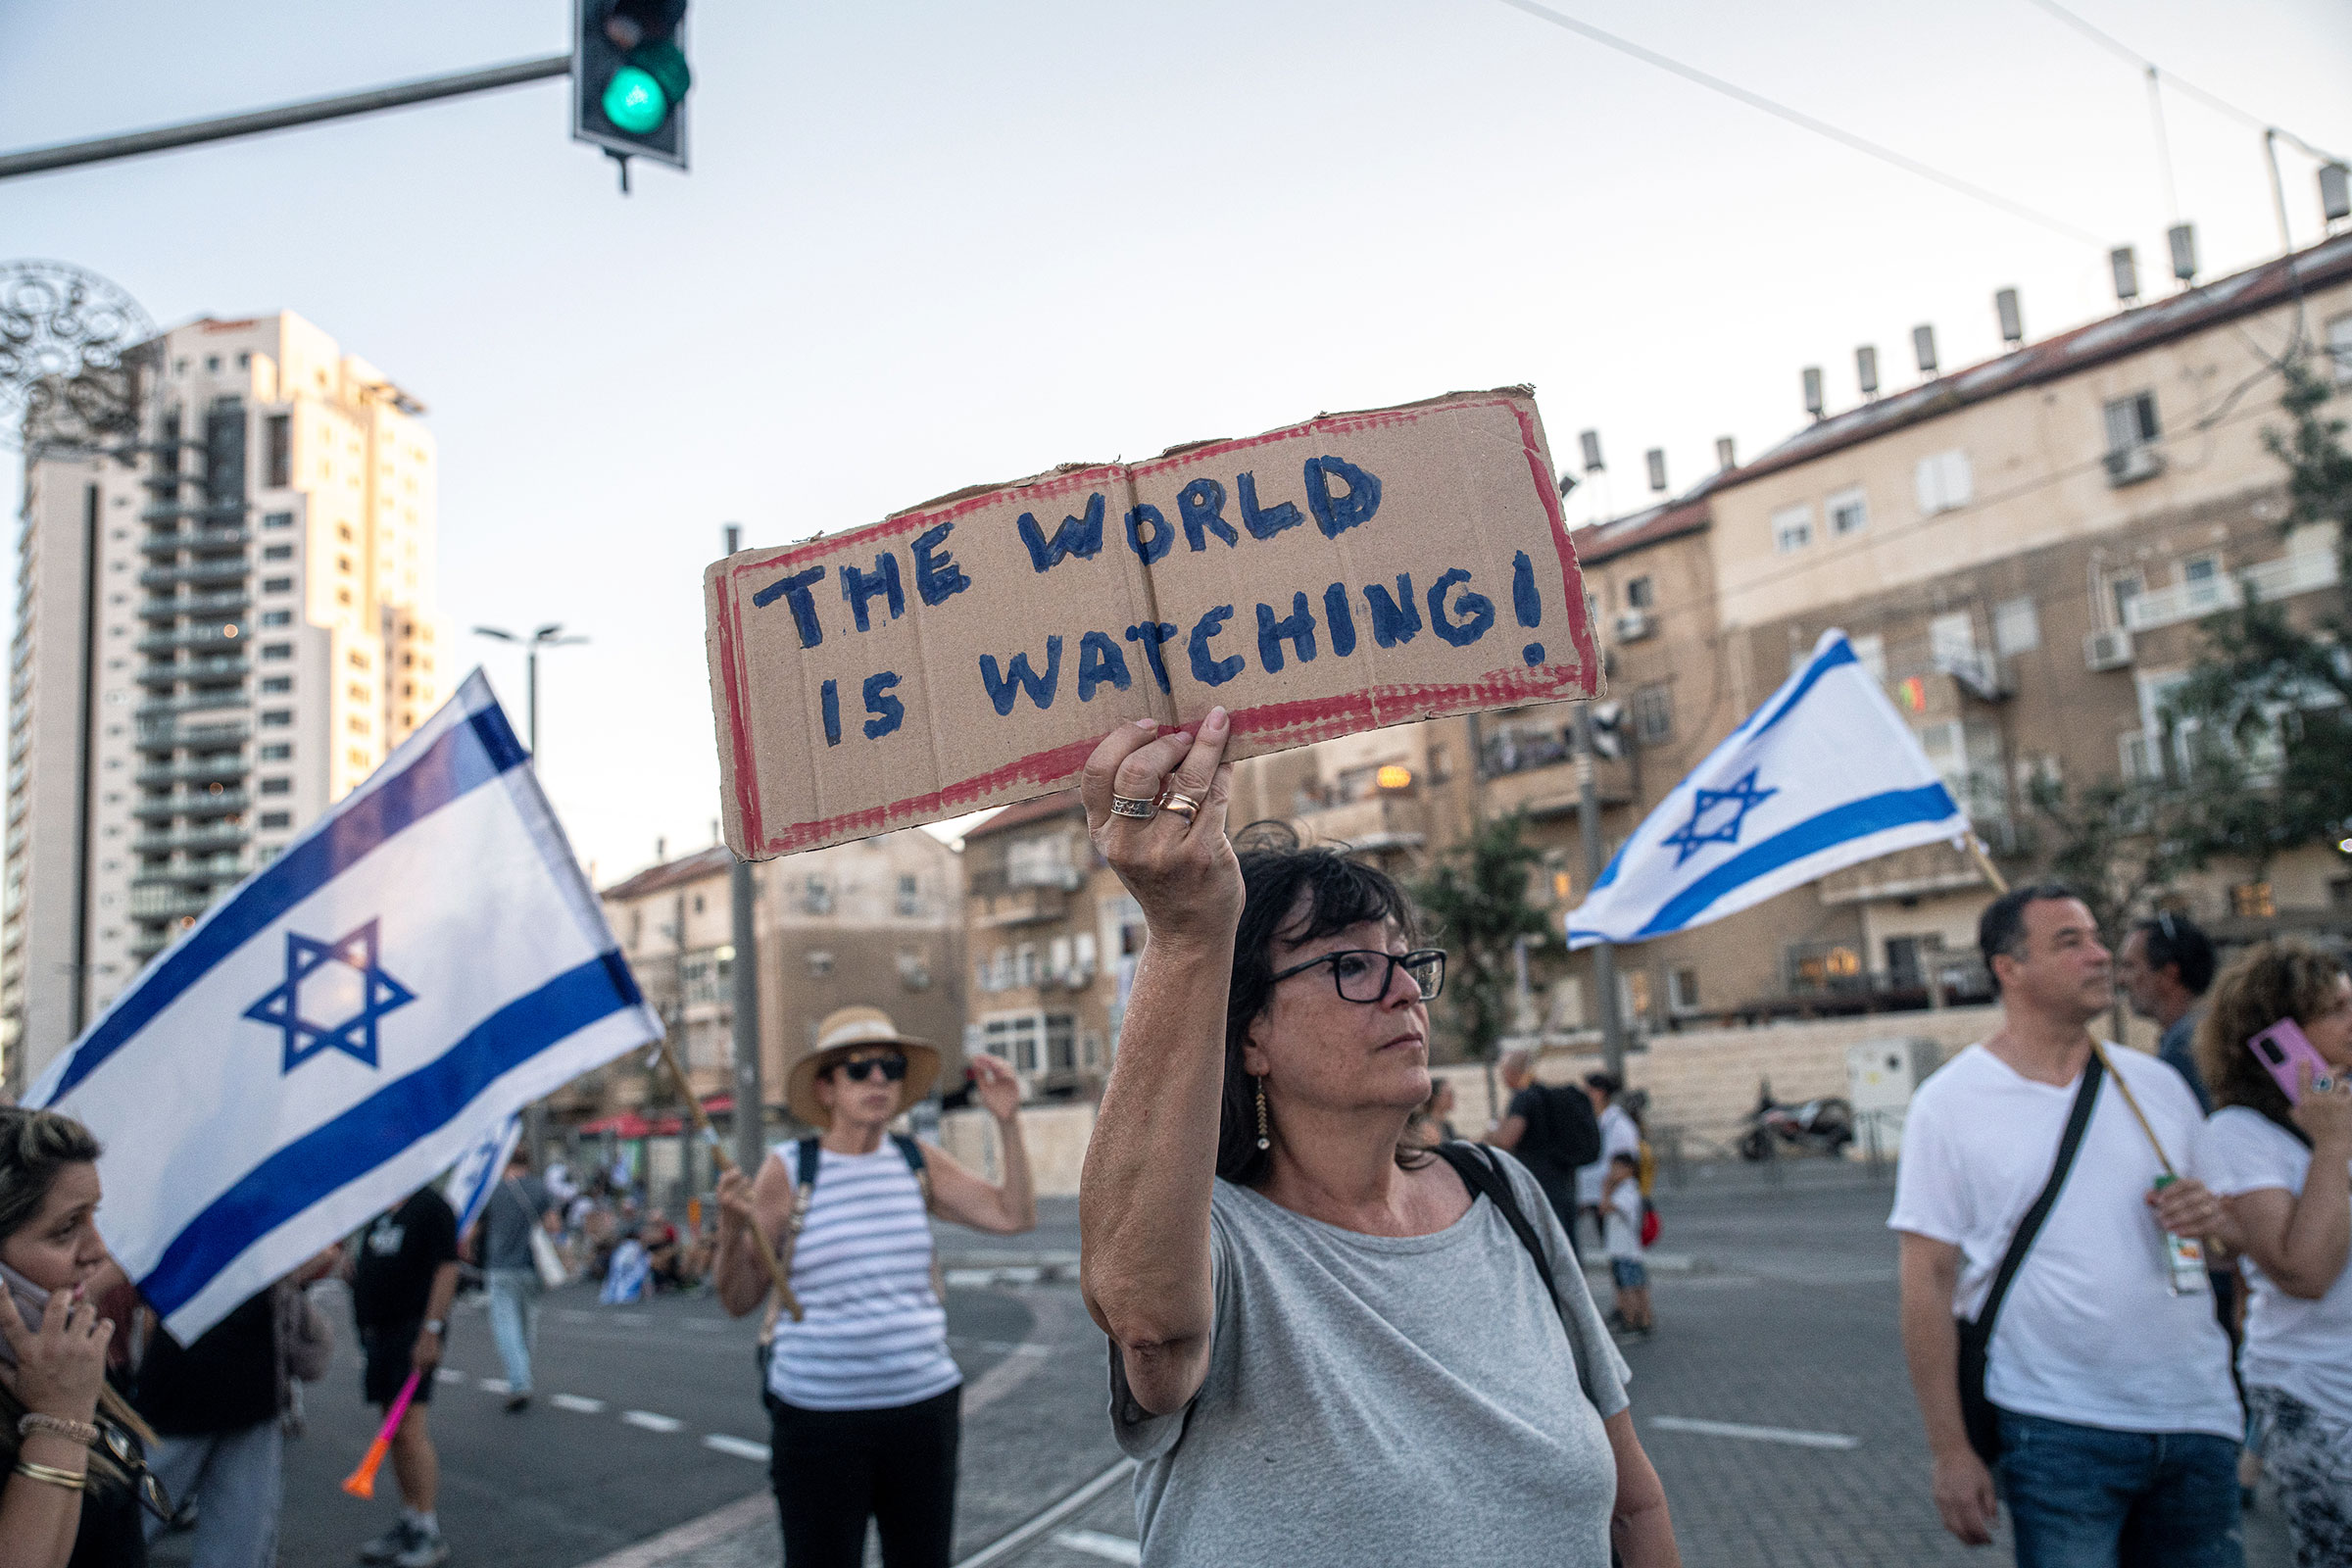 A woman, flanked by protesters behind her carrying the Israeli flag, holds a sign reading